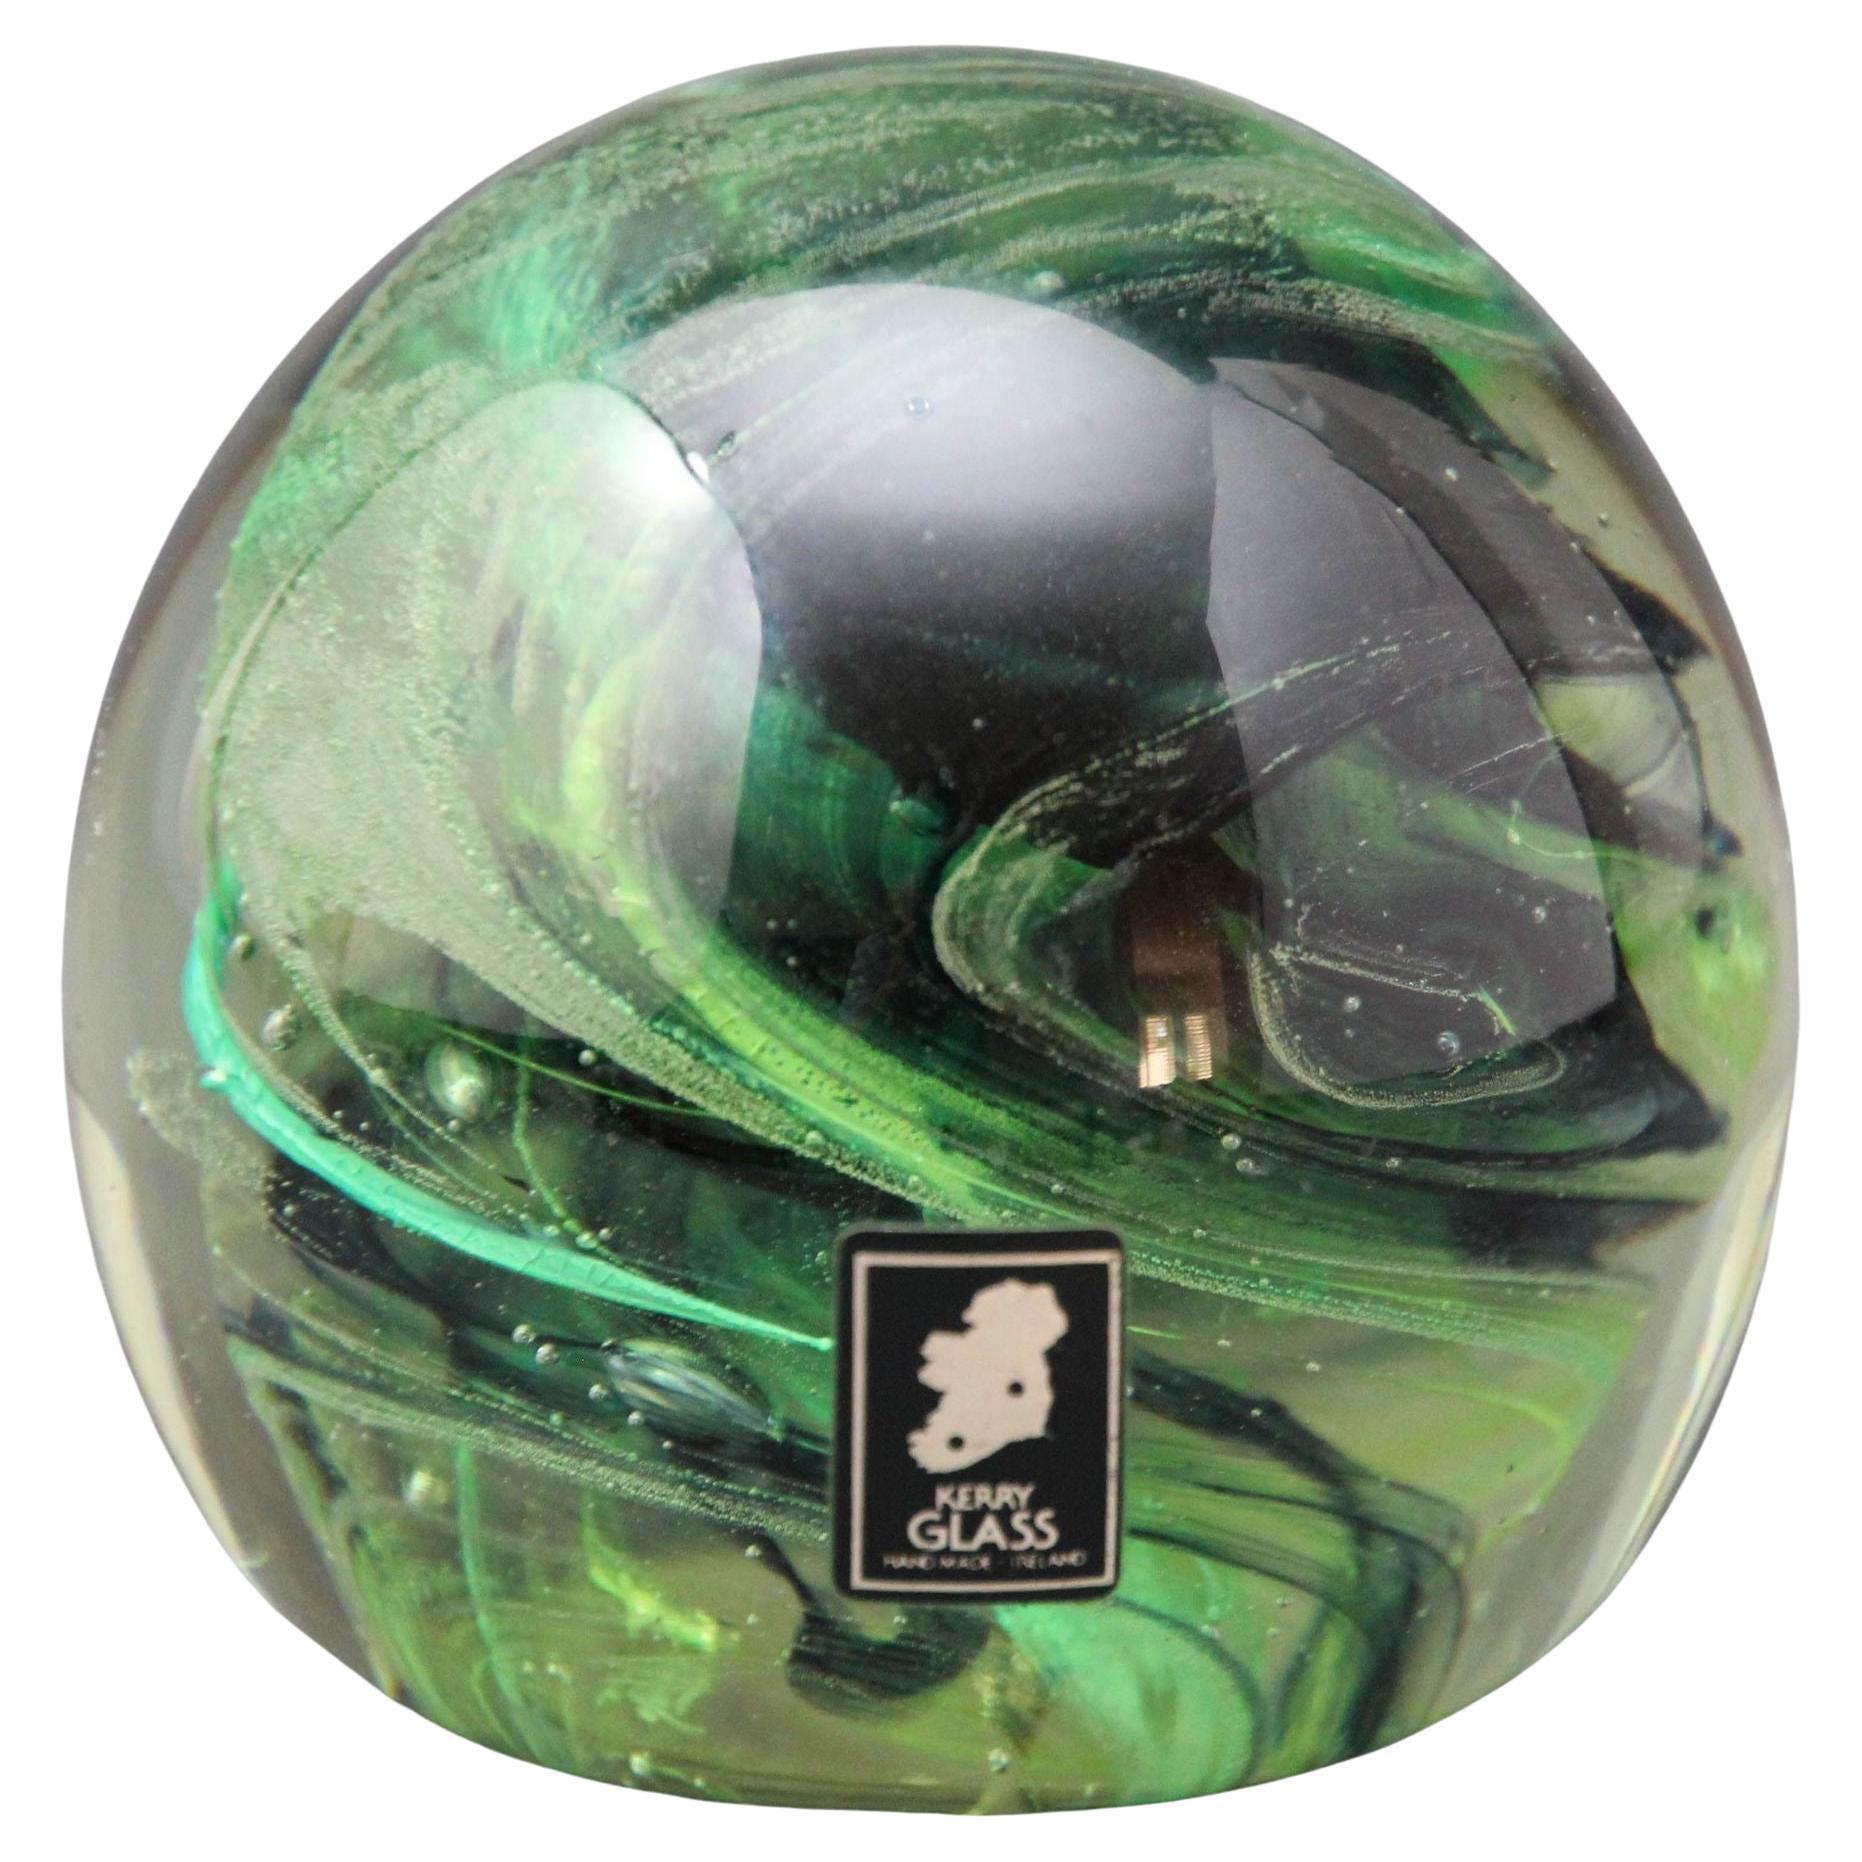 KERRY Irish Art Glass Paperweight Hand Blown in a Jade to Emerald Green 1980s For Sale